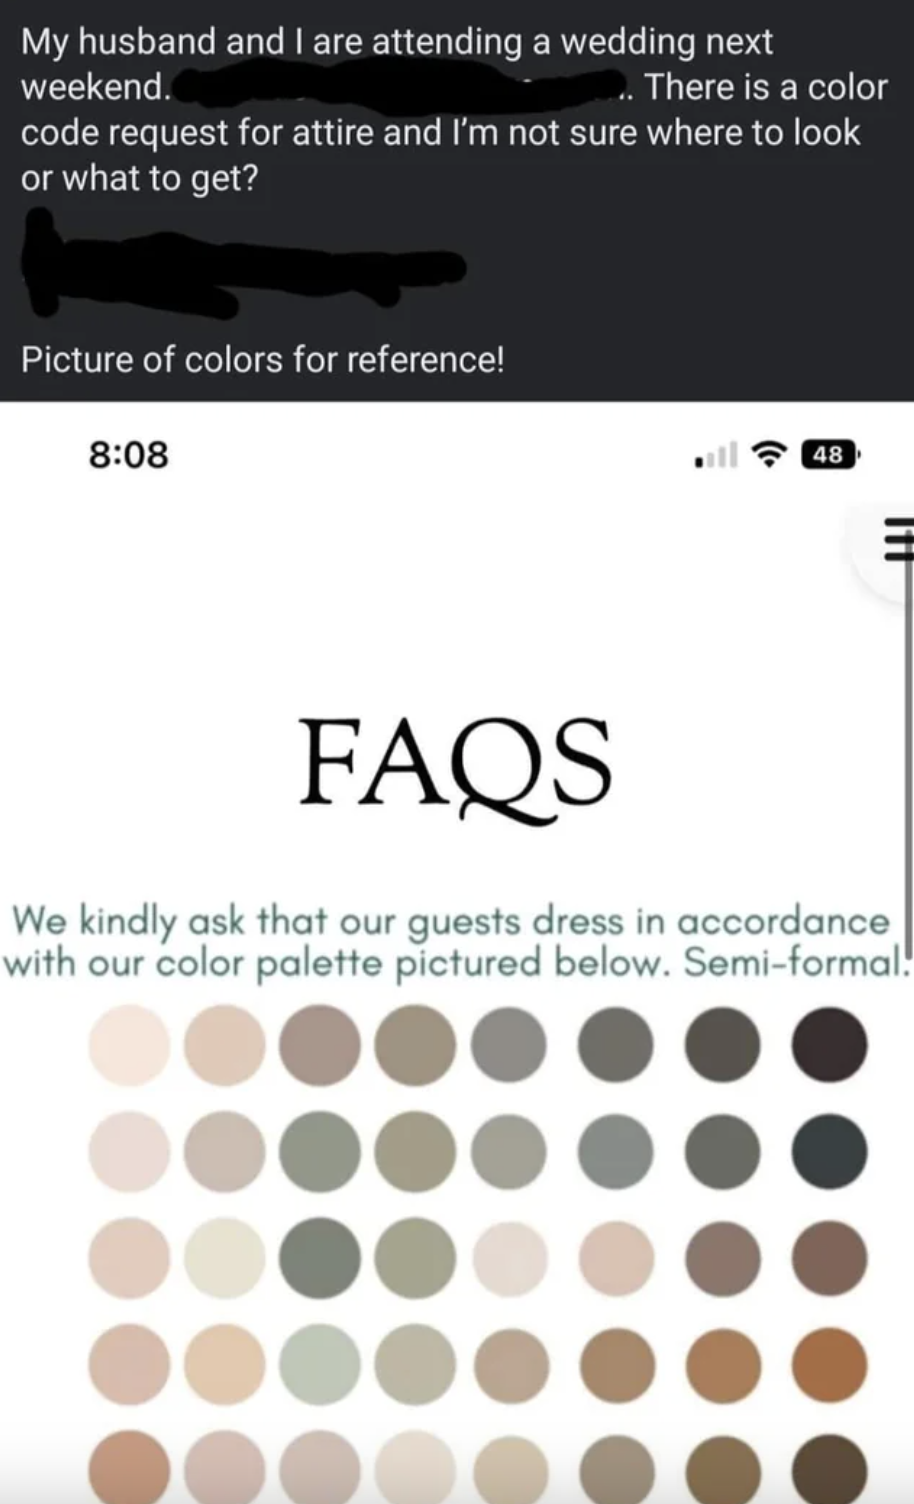 &quot;Picture of colors for reference&quot;